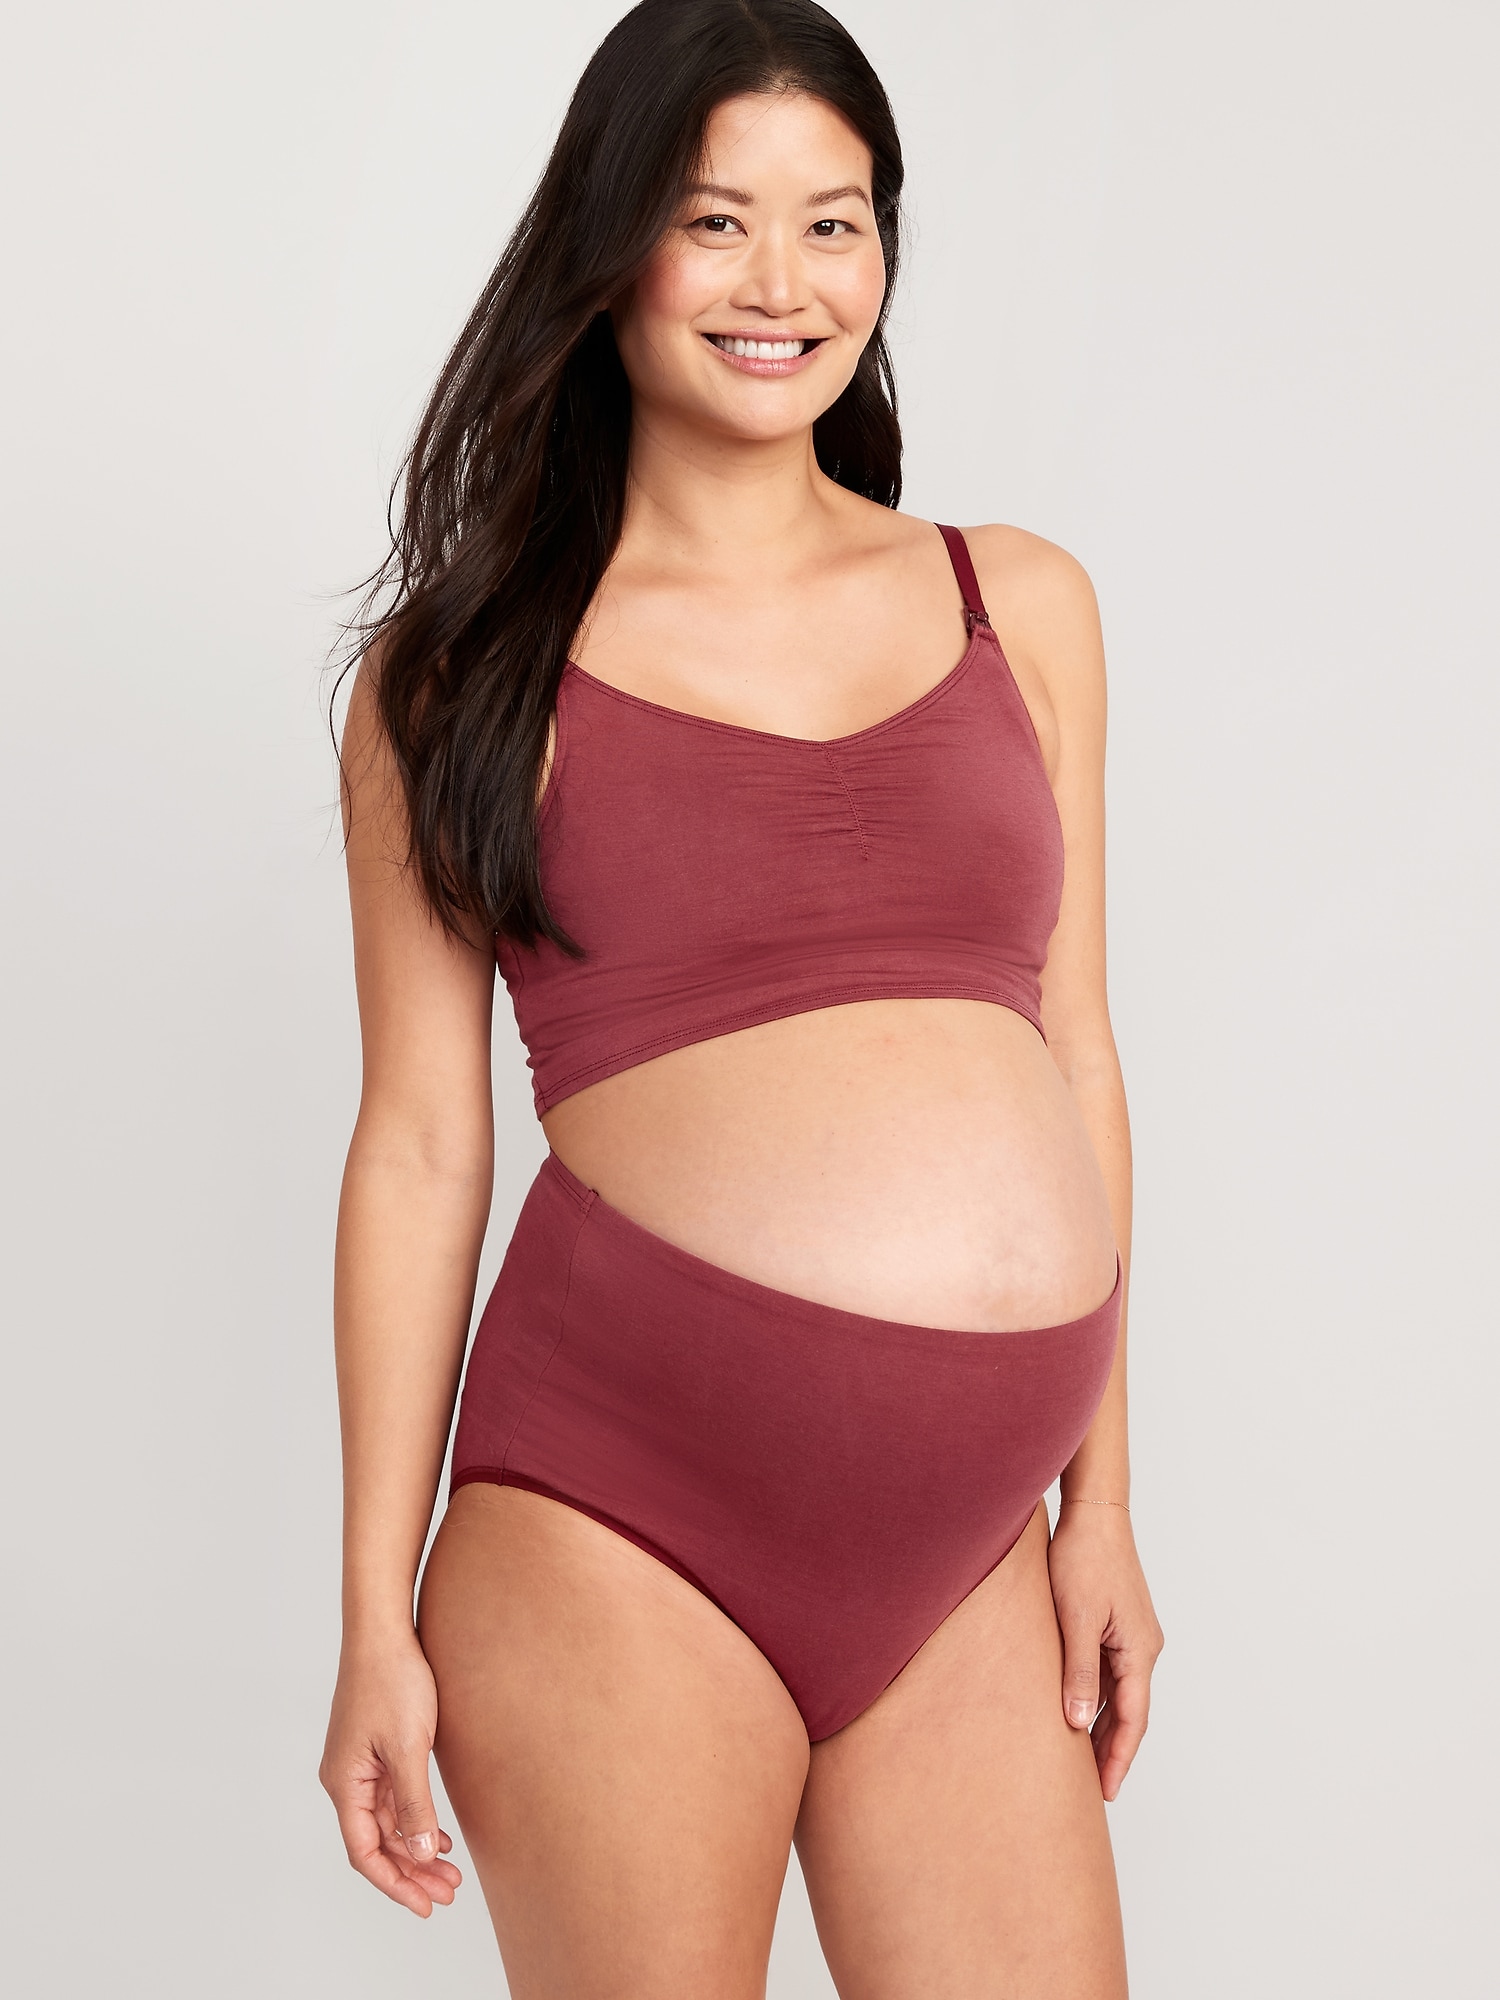 Women's Over The Bump Maternity Panties High Waist Full Coverage